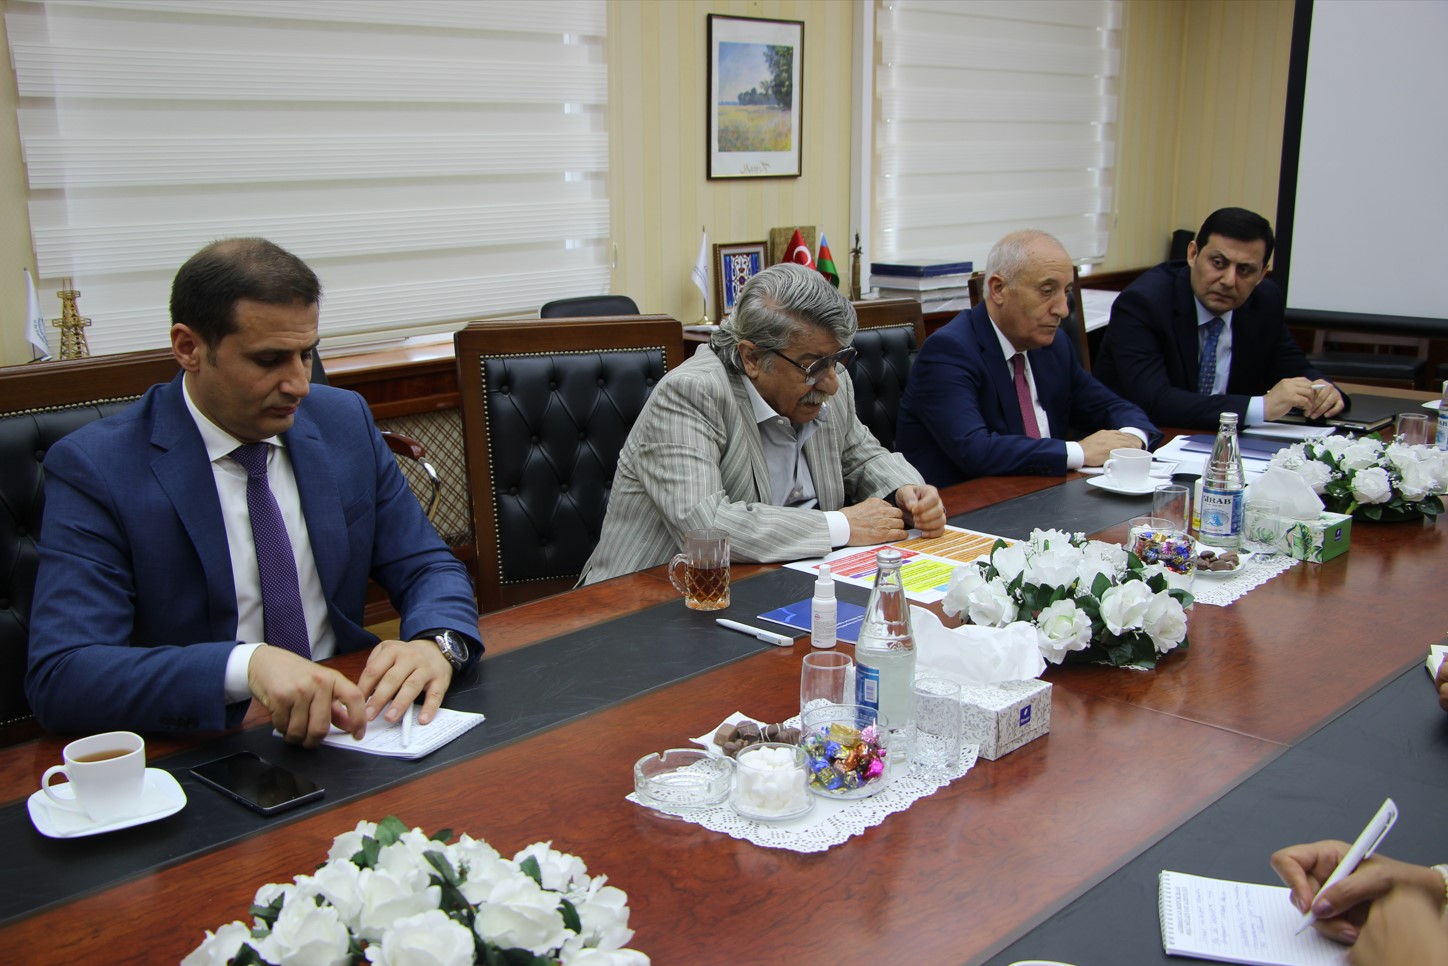 ​A Memorandum on joint cooperation was signed between the Intellectual Property Agency and the Mediation Council